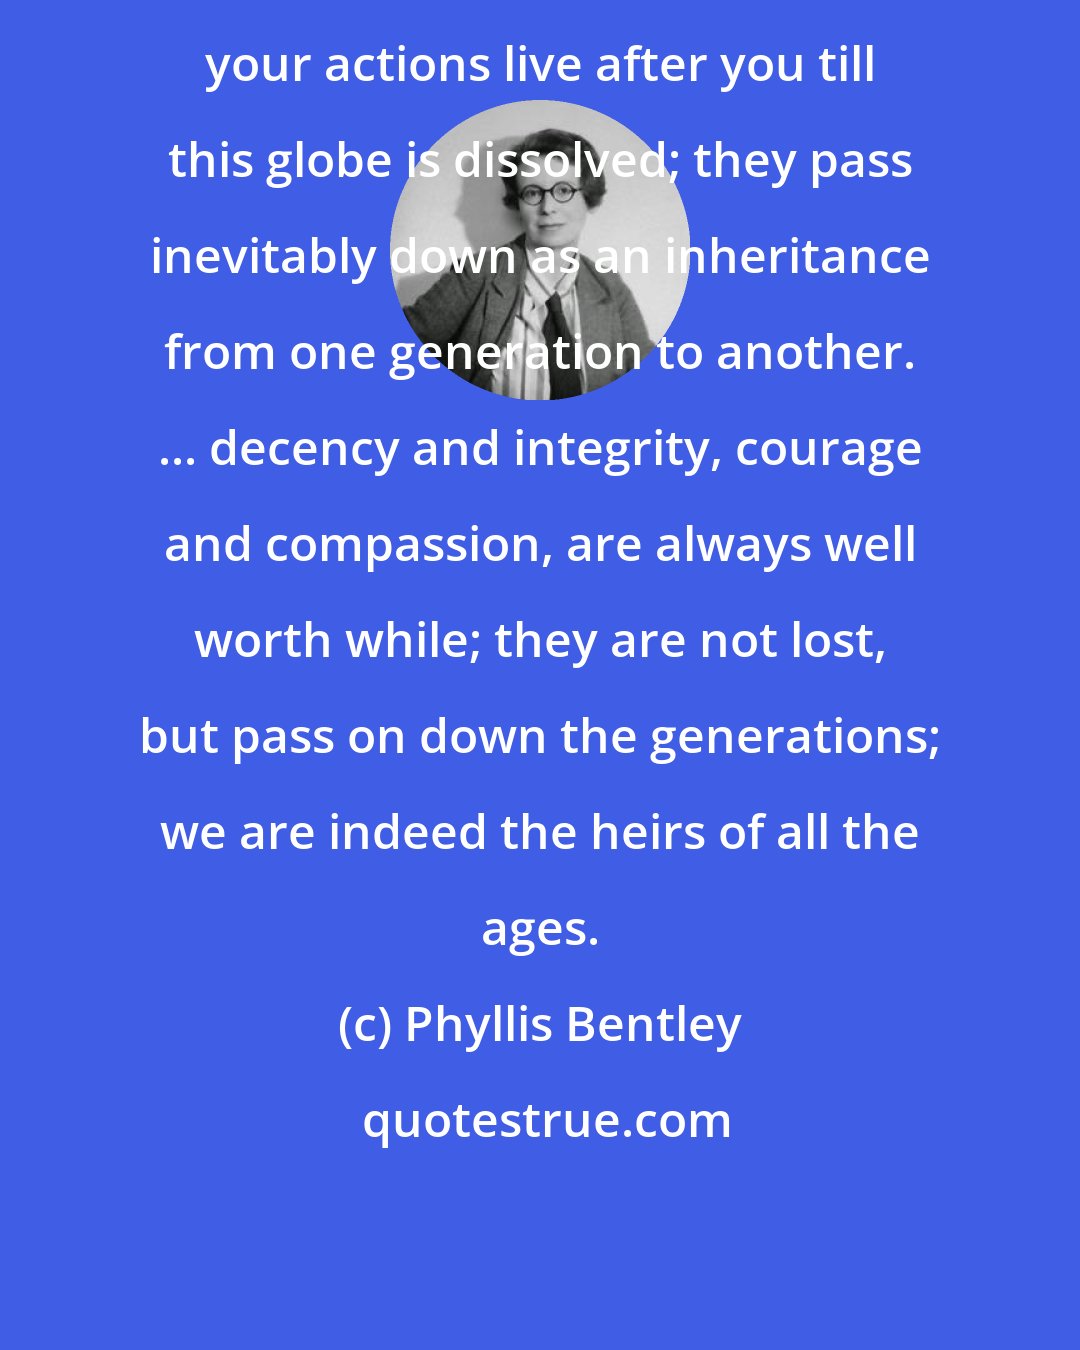 Phyllis Bentley: your actions live after you till this globe is dissolved; they pass inevitably down as an inheritance from one generation to another. ... decency and integrity, courage and compassion, are always well worth while; they are not lost, but pass on down the generations; we are indeed the heirs of all the ages.